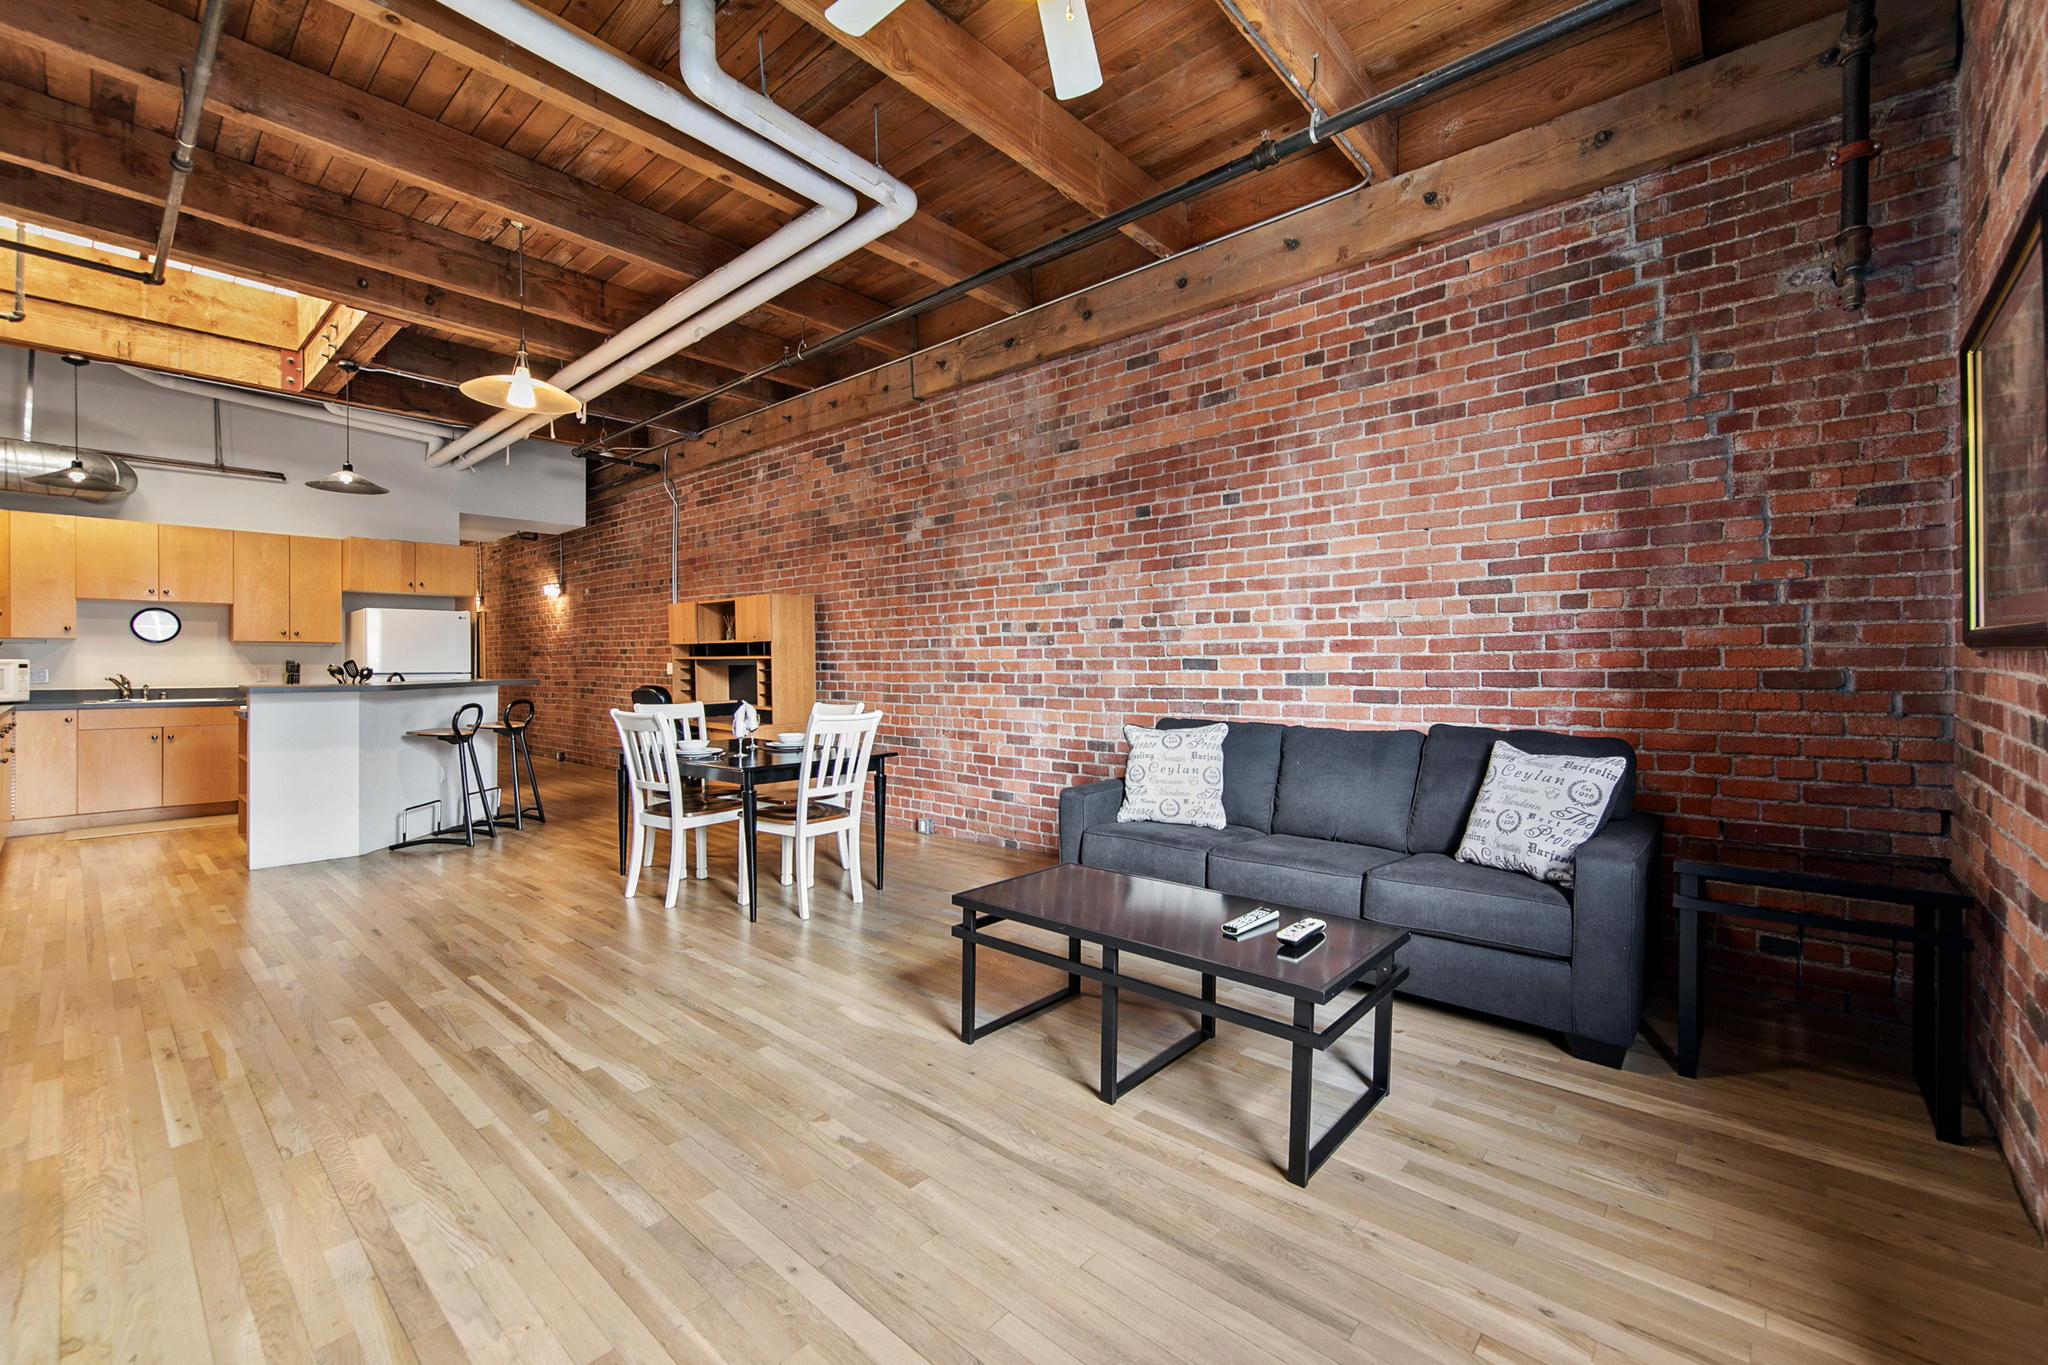 1 Bedroom/1Bathroom loft in Denver\'s new LoDo (Lower Downtown) district!  Features: original exposed brick walls, original arched windows, breakfast bar, granite slab, granite tile in kitchen, and walk-in closet.

Amenities include: community rooftop deck, club/party room, fitness center.

The building sits within easy walking distance to shops, restaurants, bars, the light rail station, and Coors Field. For residents looking for culture, the building is also closely situated to museums and theaters.